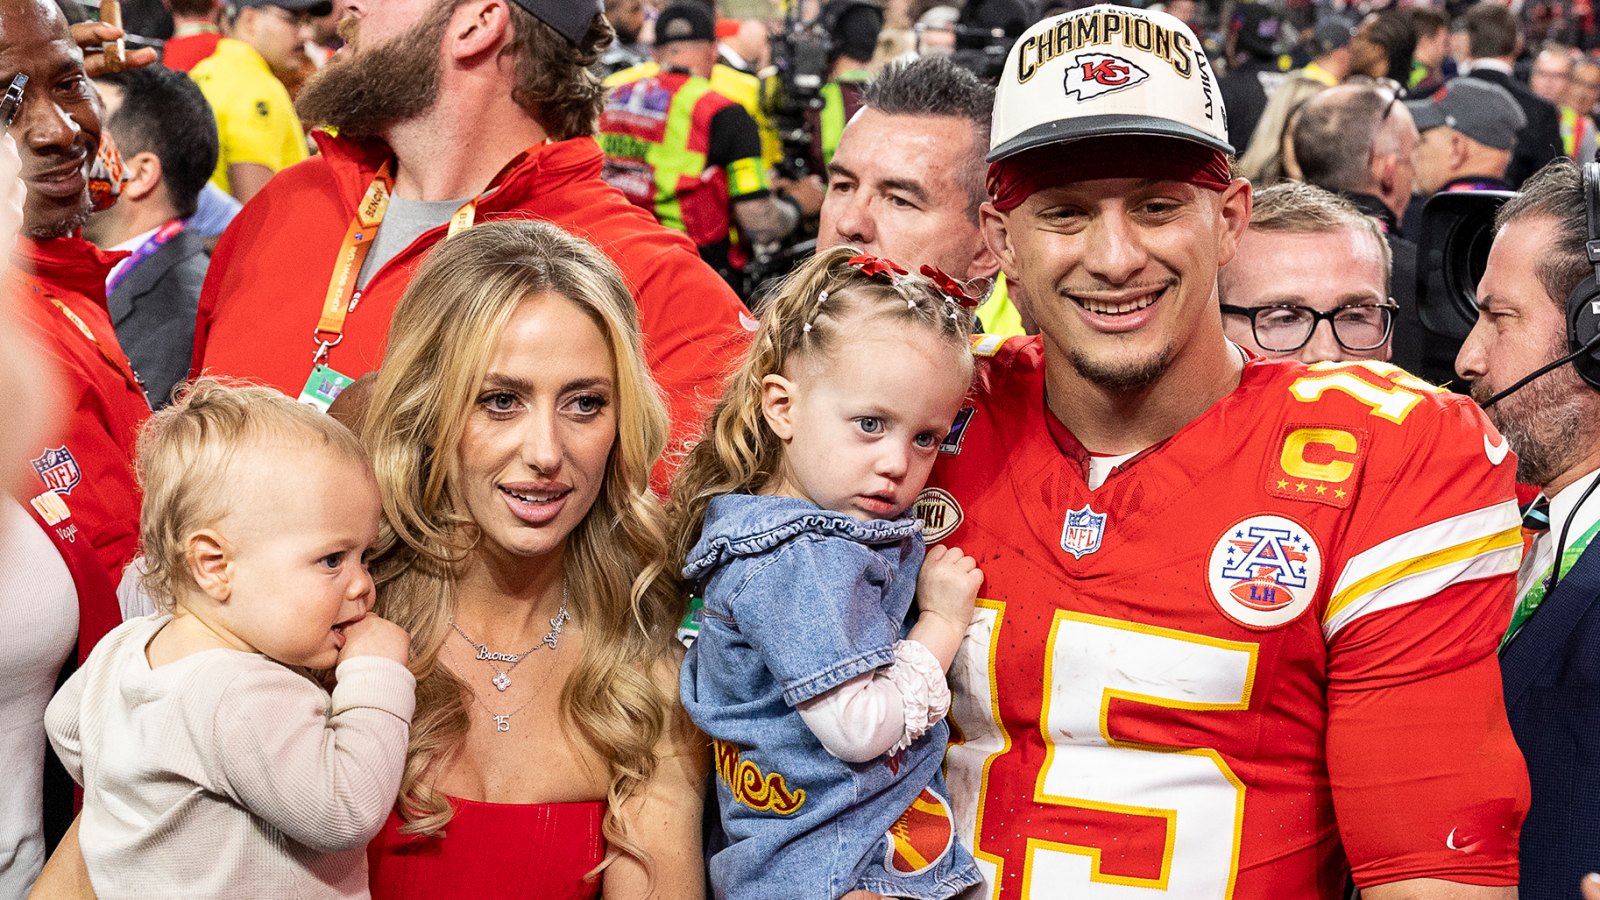 Patrick Mahomes Sweetly Reads Picture Books to His 2 Kids